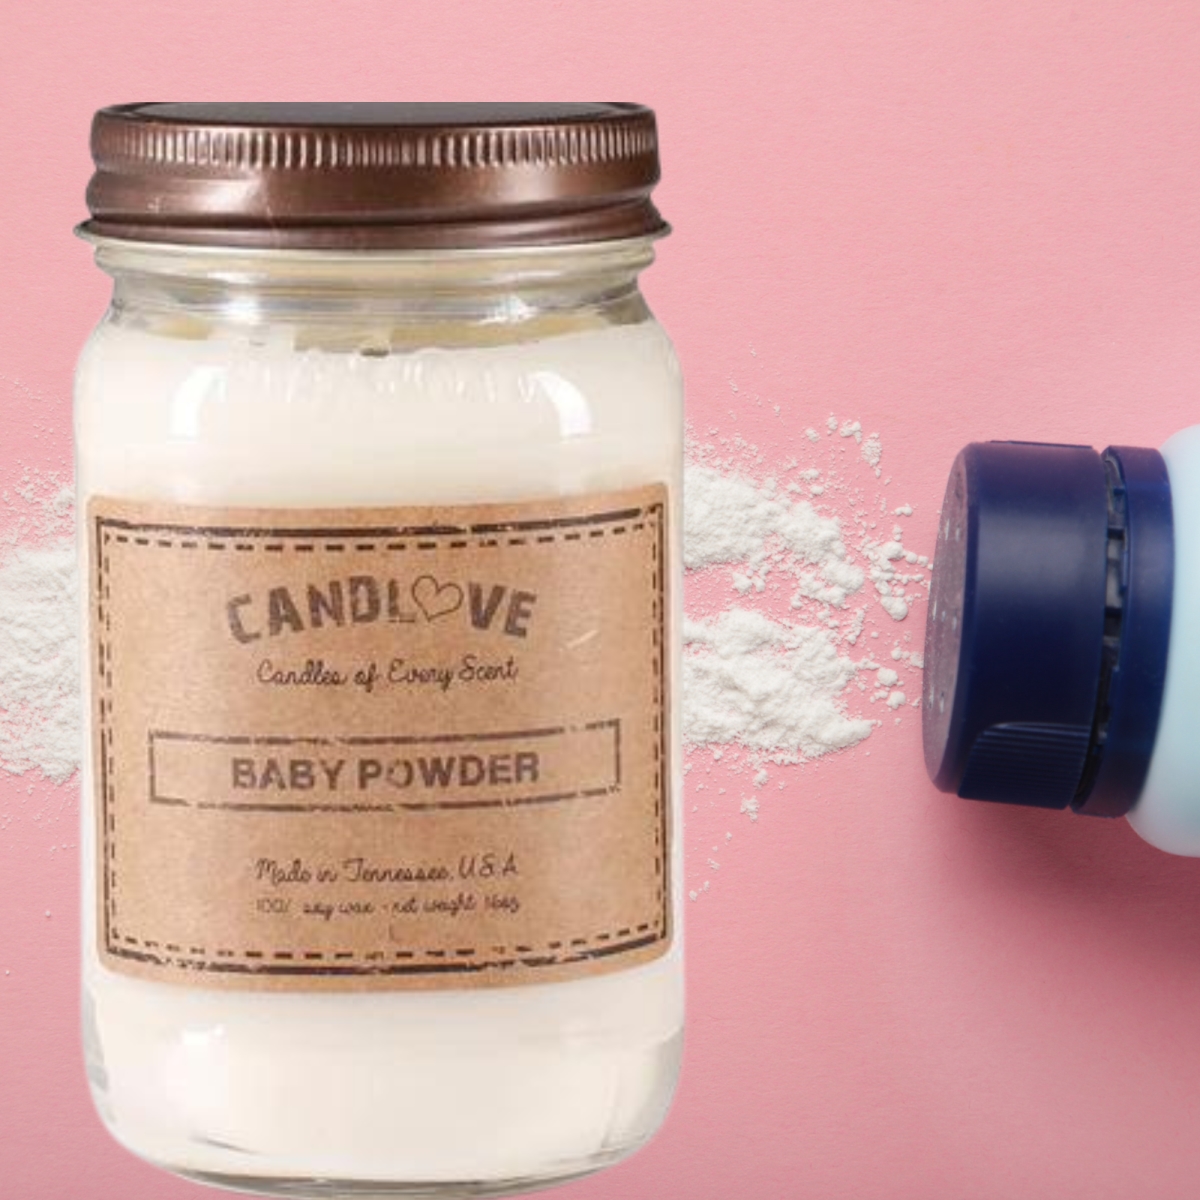 Picture of PPI SUPPLIES Baby-P-C Candlove Baby Powder Scented Candle - Non-Toxic 100% Soy Candle - Handmade & Hand Poured Long Burning Candle - Highly Scented All Natural Clean Burning Candle (16 OZ Mason Jar) Made in The USA